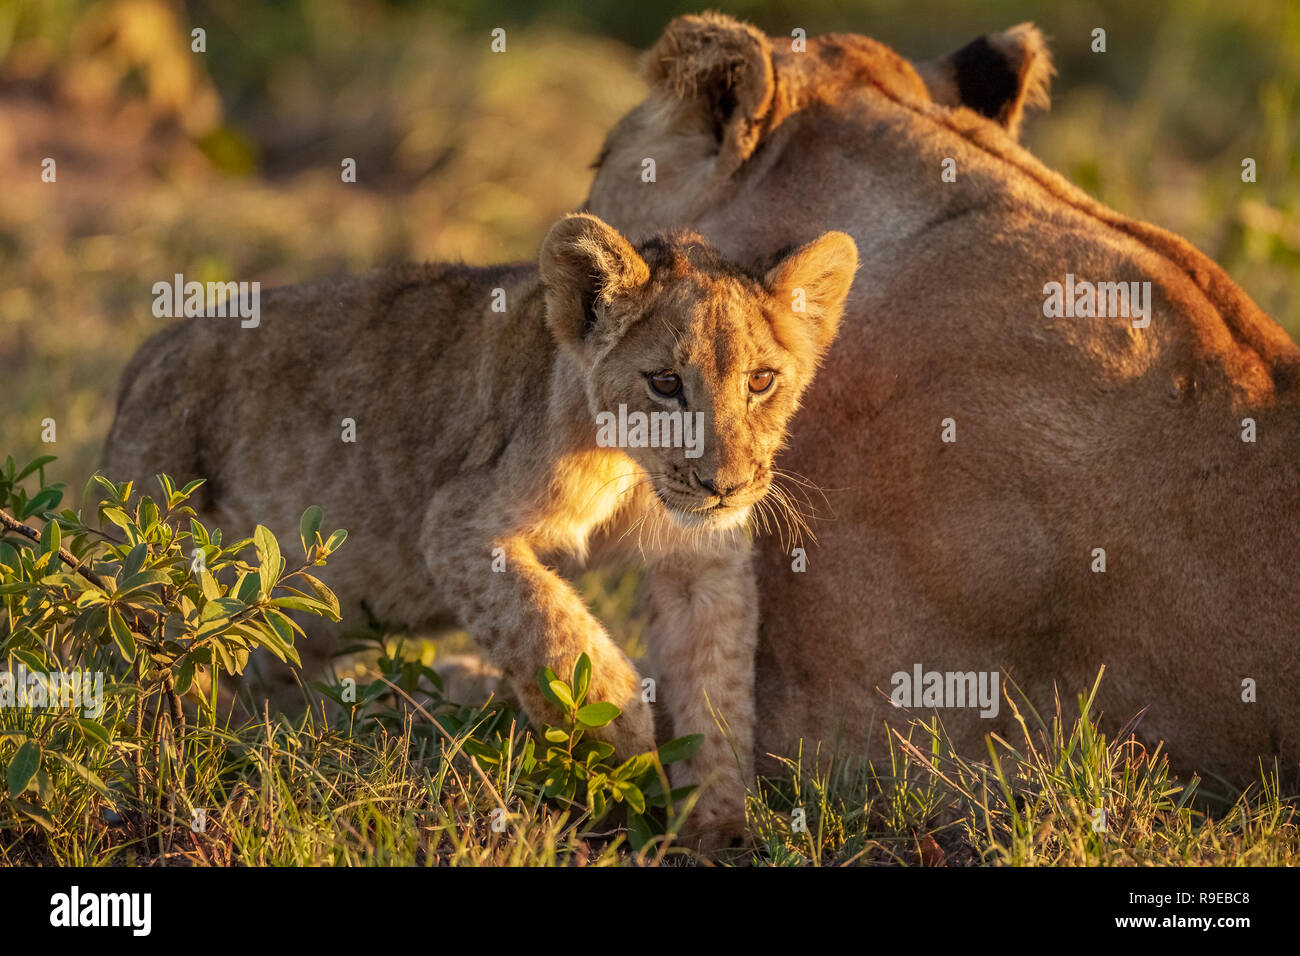 cute baby lion cub rubbing against his mom in grass during golden hour Stock Photo